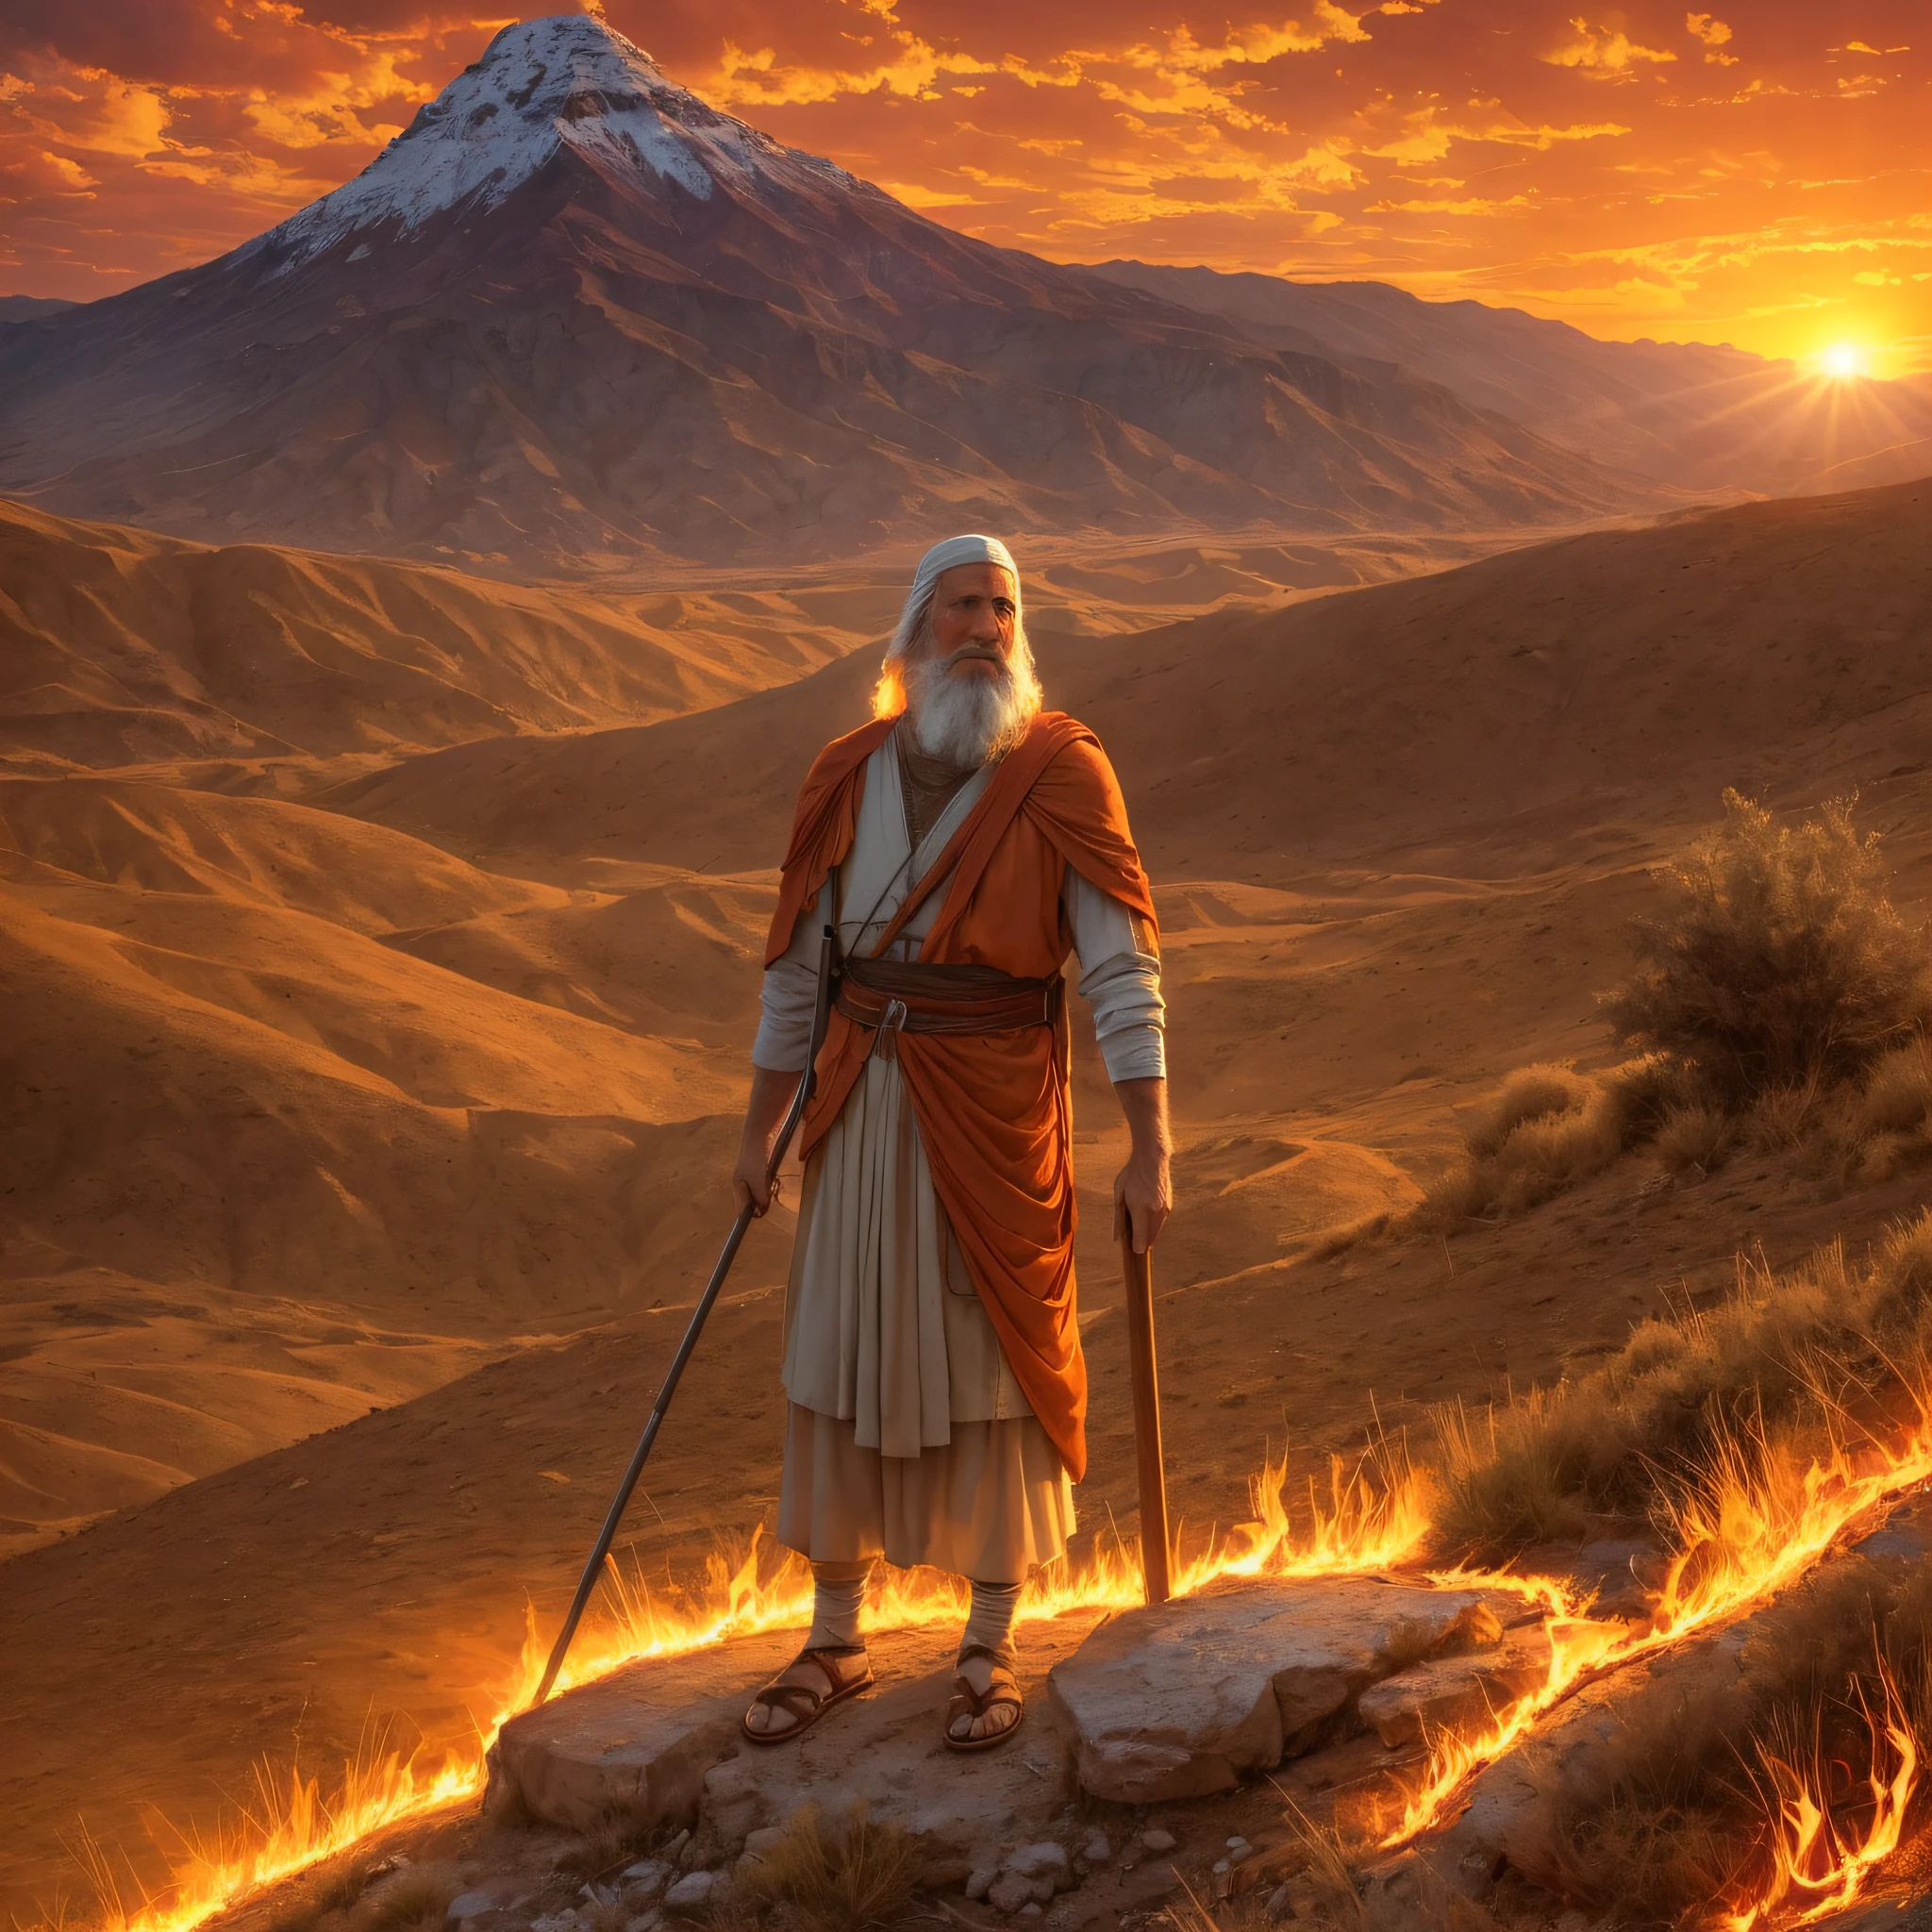 Moses before the burning full bush on Mount Horeb. Moses is an old man dressed as a shepherd. The bush is on bright, vibrant flames, but it is not consumed by fire. Moses looks with amazement and admiration at the bush. The surrounding environment is mountainous and desert, with the sun setting and illuminating the scene with an orange light. This image represents the moment when Moses is called by God to deliver the people of Israel. --auto --s2